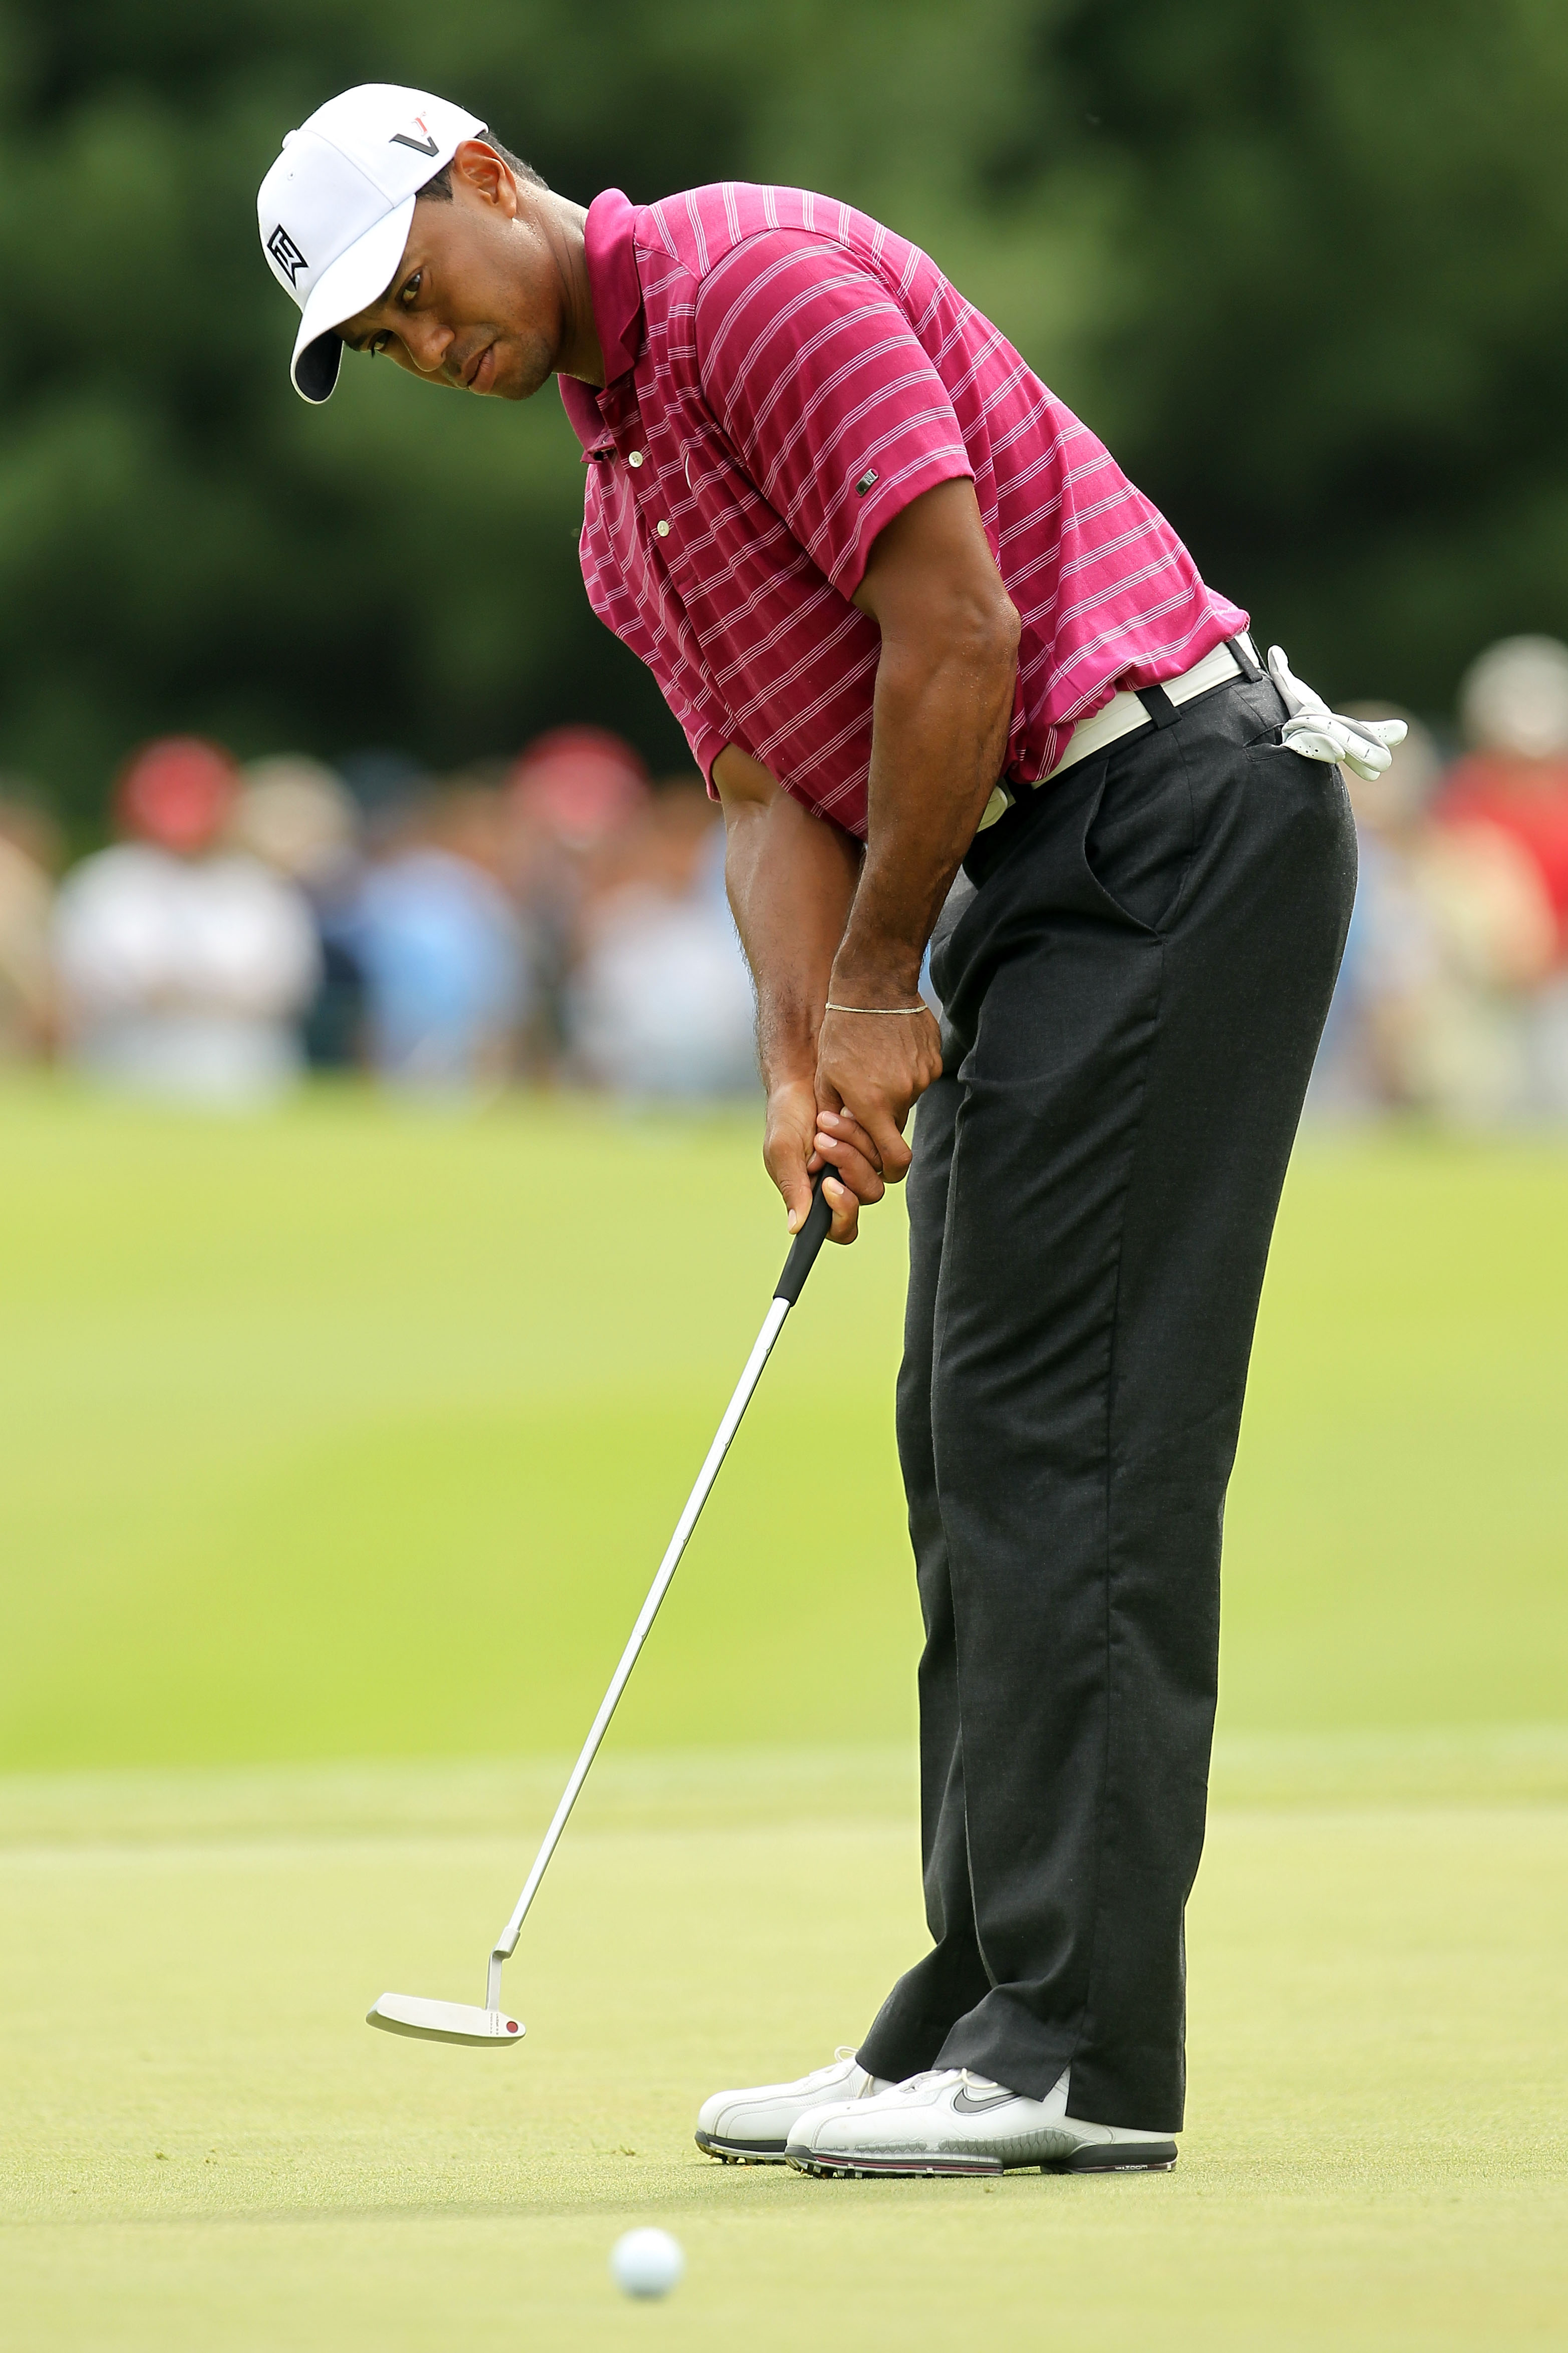 NORTON, MA - SEPTEMBER 03:  Tiger Woods putts on the 10th green during the first round of the Deutsche Bank Championship at TPC Boston on September 3, 2010 in Norton, Massachusetts.  (Photo by Mike Ehrmann/Getty Images)